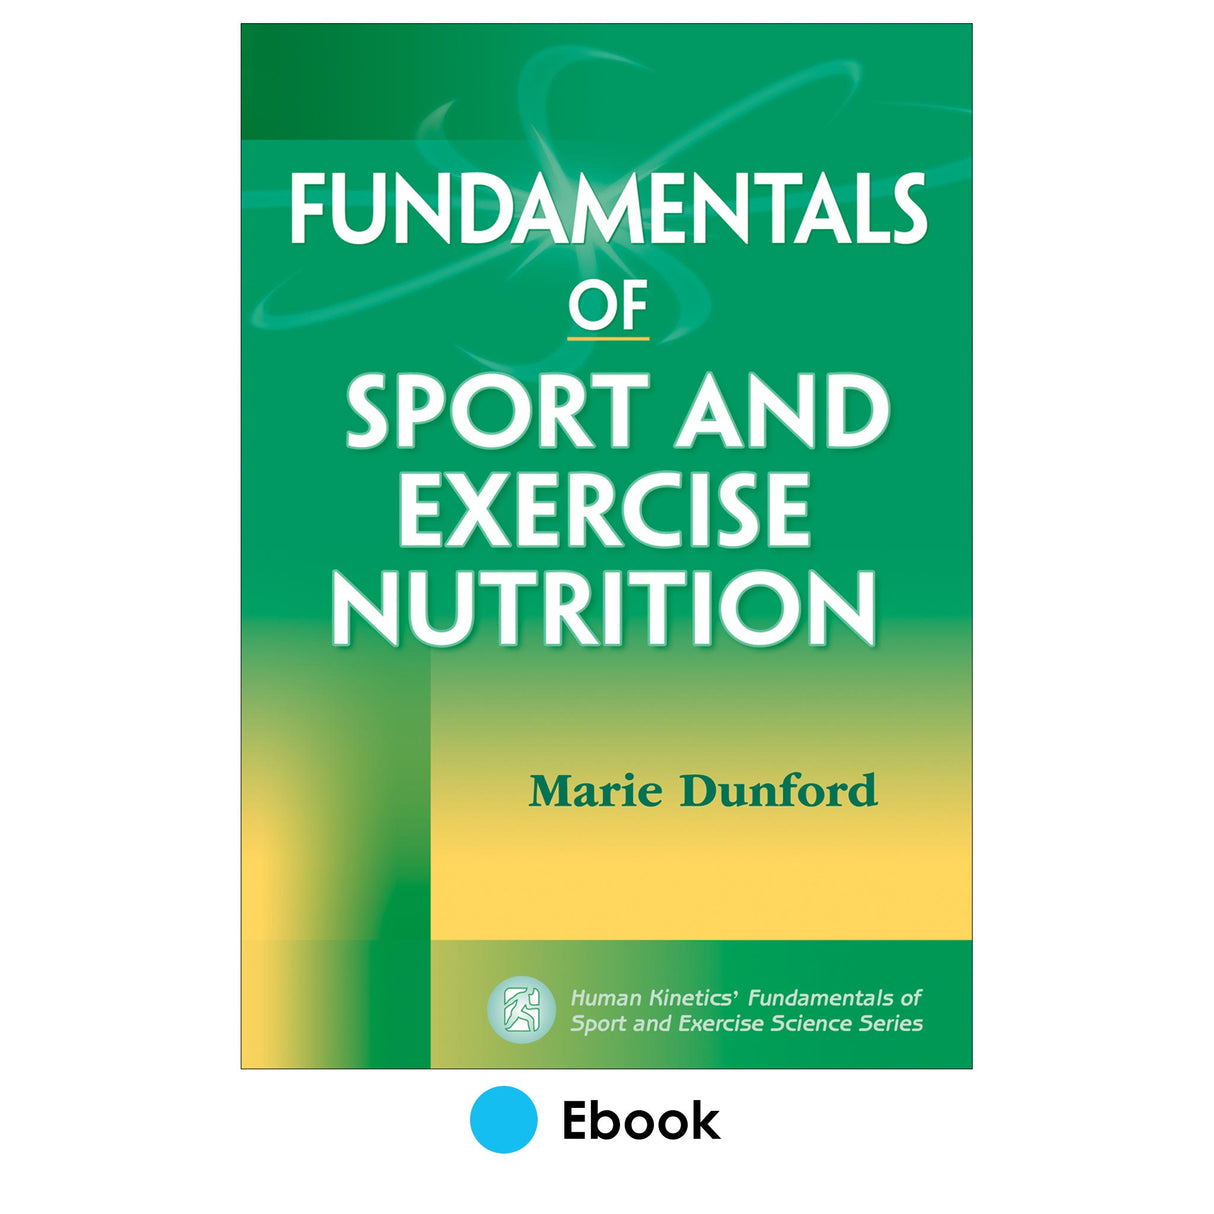 Fundamentals of Sport and Exercise Nutrition PDF